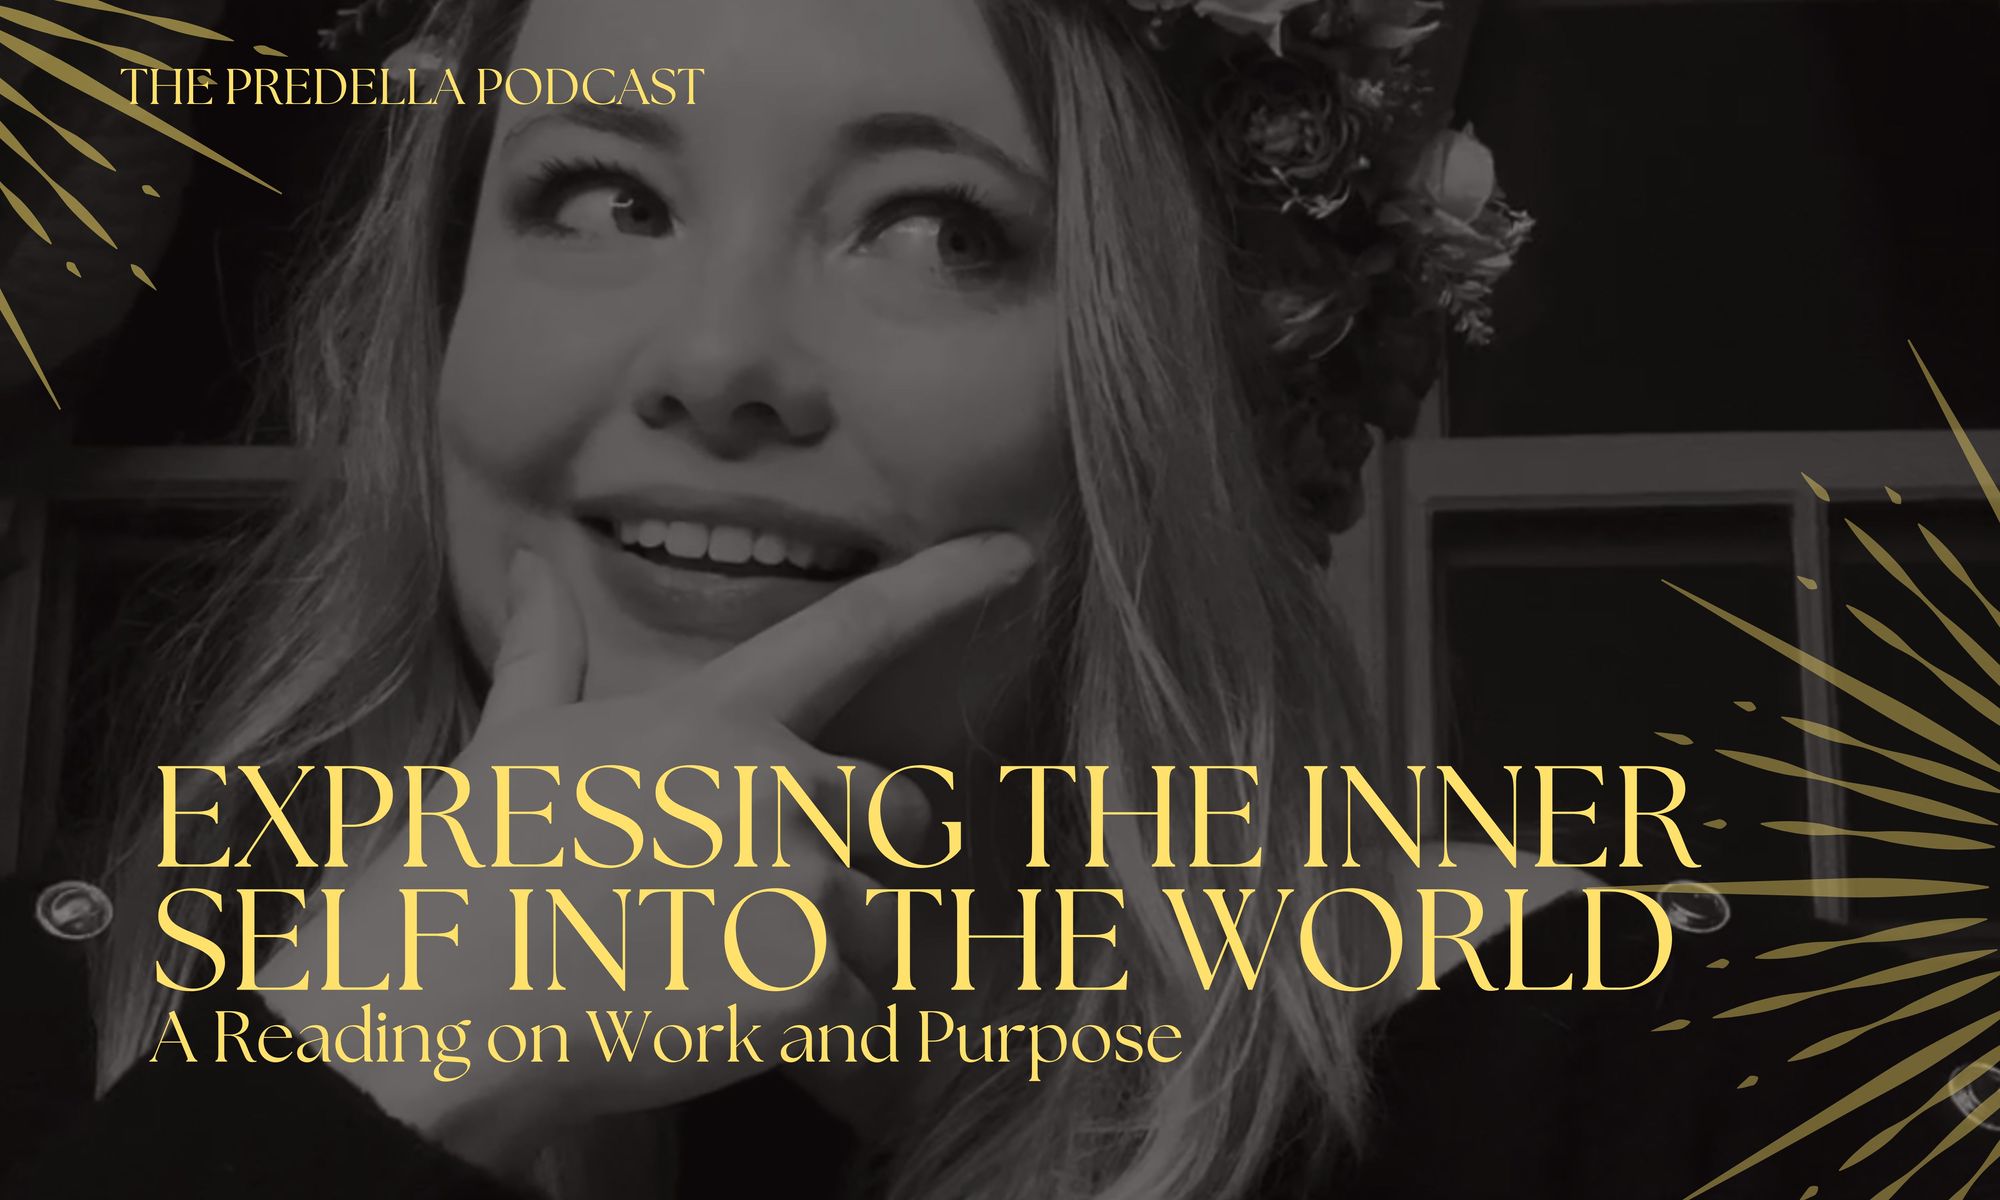 The Predella Podcast: Expressing the Inner Self Into the World - 05